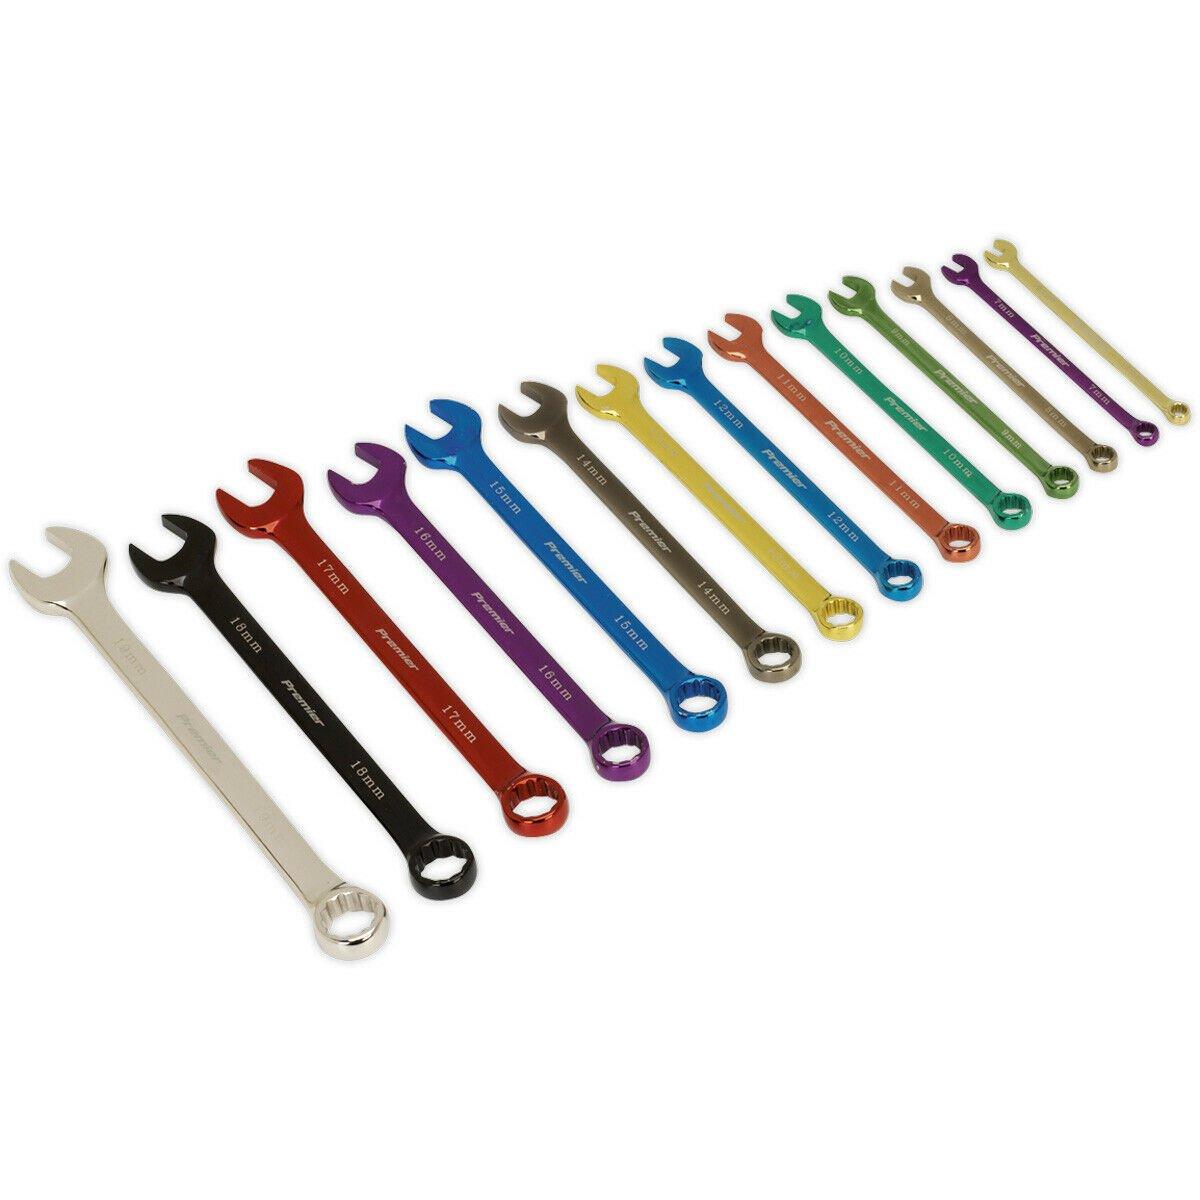 14pc MULTI COLOUR Combination Spanner Set Metric 12 Point Socket Nut Ring Wrench